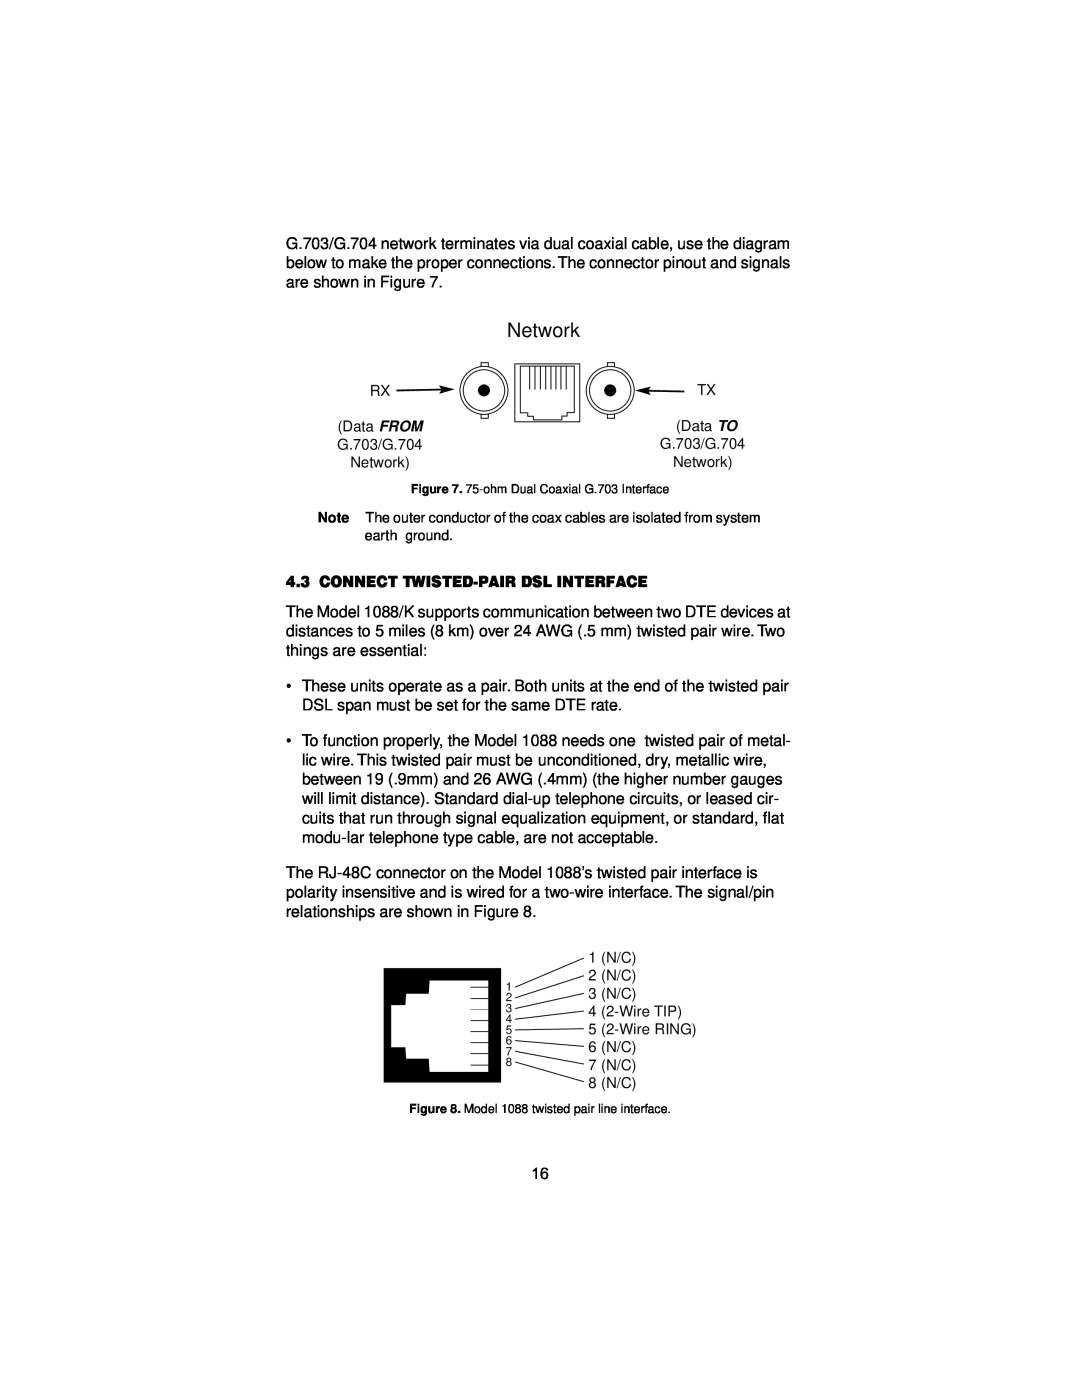 Patton electronic 1088/K user manual Network, Connect Twisted-Pair Dsl Interface 